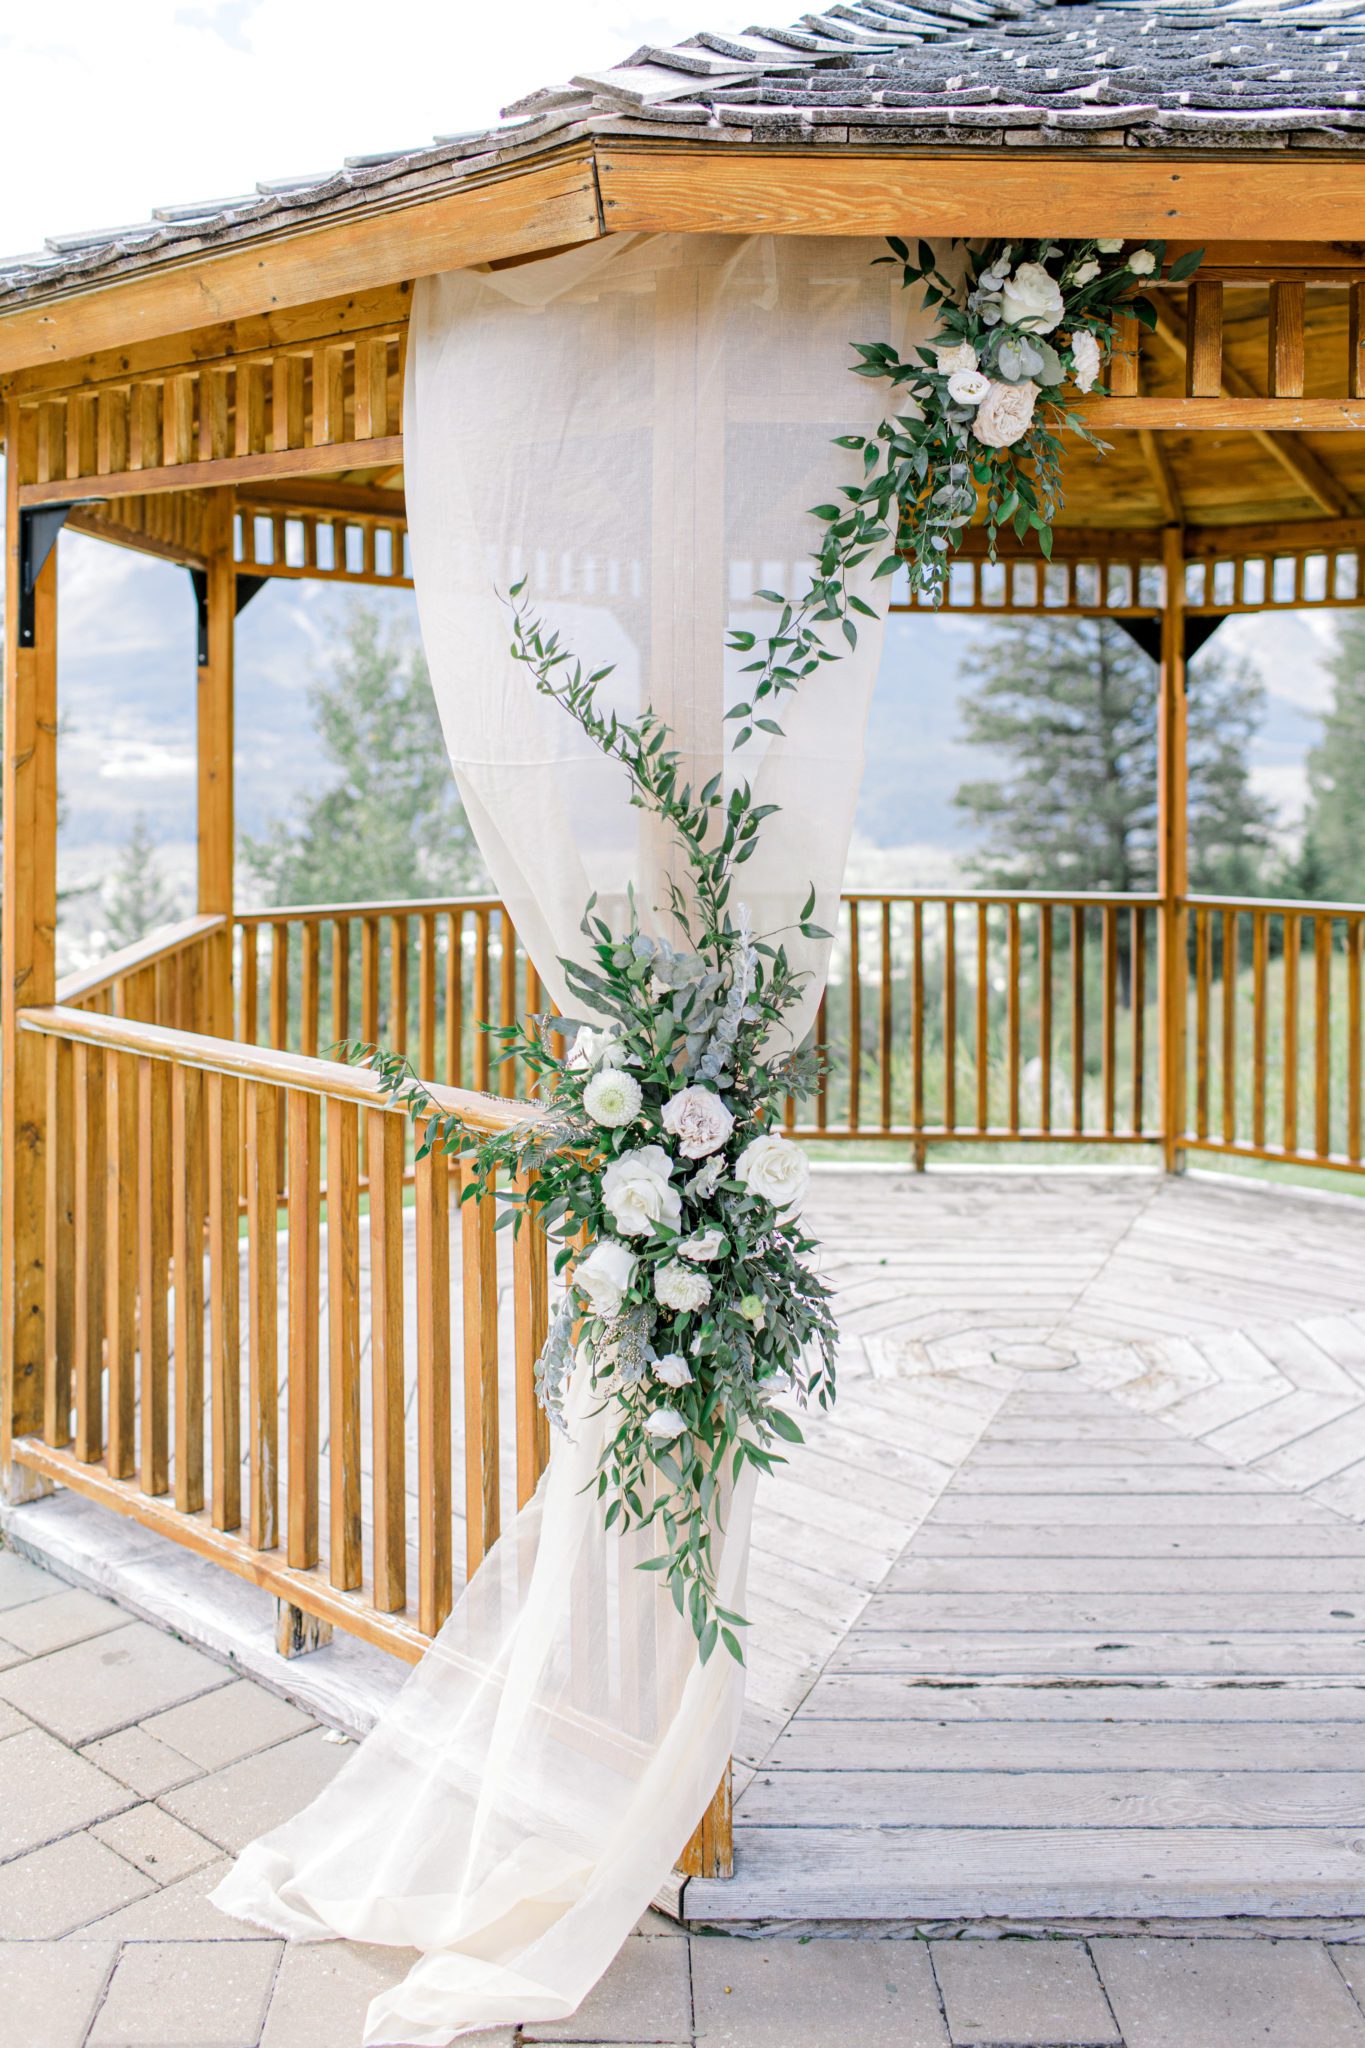 Outdoor wedding gazebo in Canmore, Alberta at Silvertip Resort. Blush and green florals on blush drapery, classic wedding ceremony inspiration. 